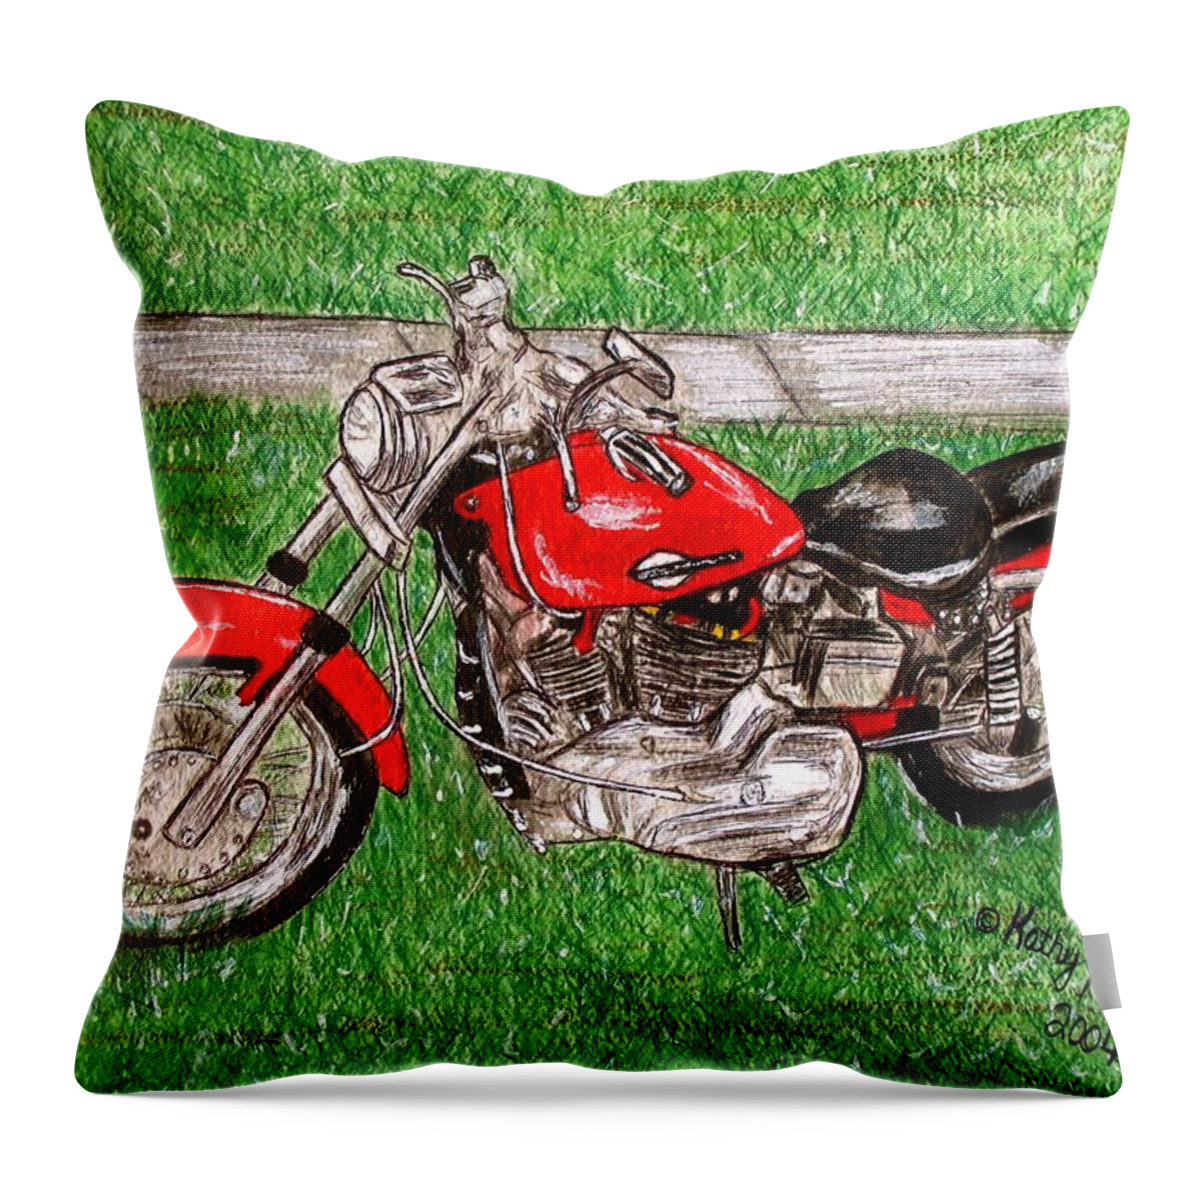 Harley Throw Pillow featuring the painting Harley Red Sportster Motorcycle by Kathy Marrs Chandler